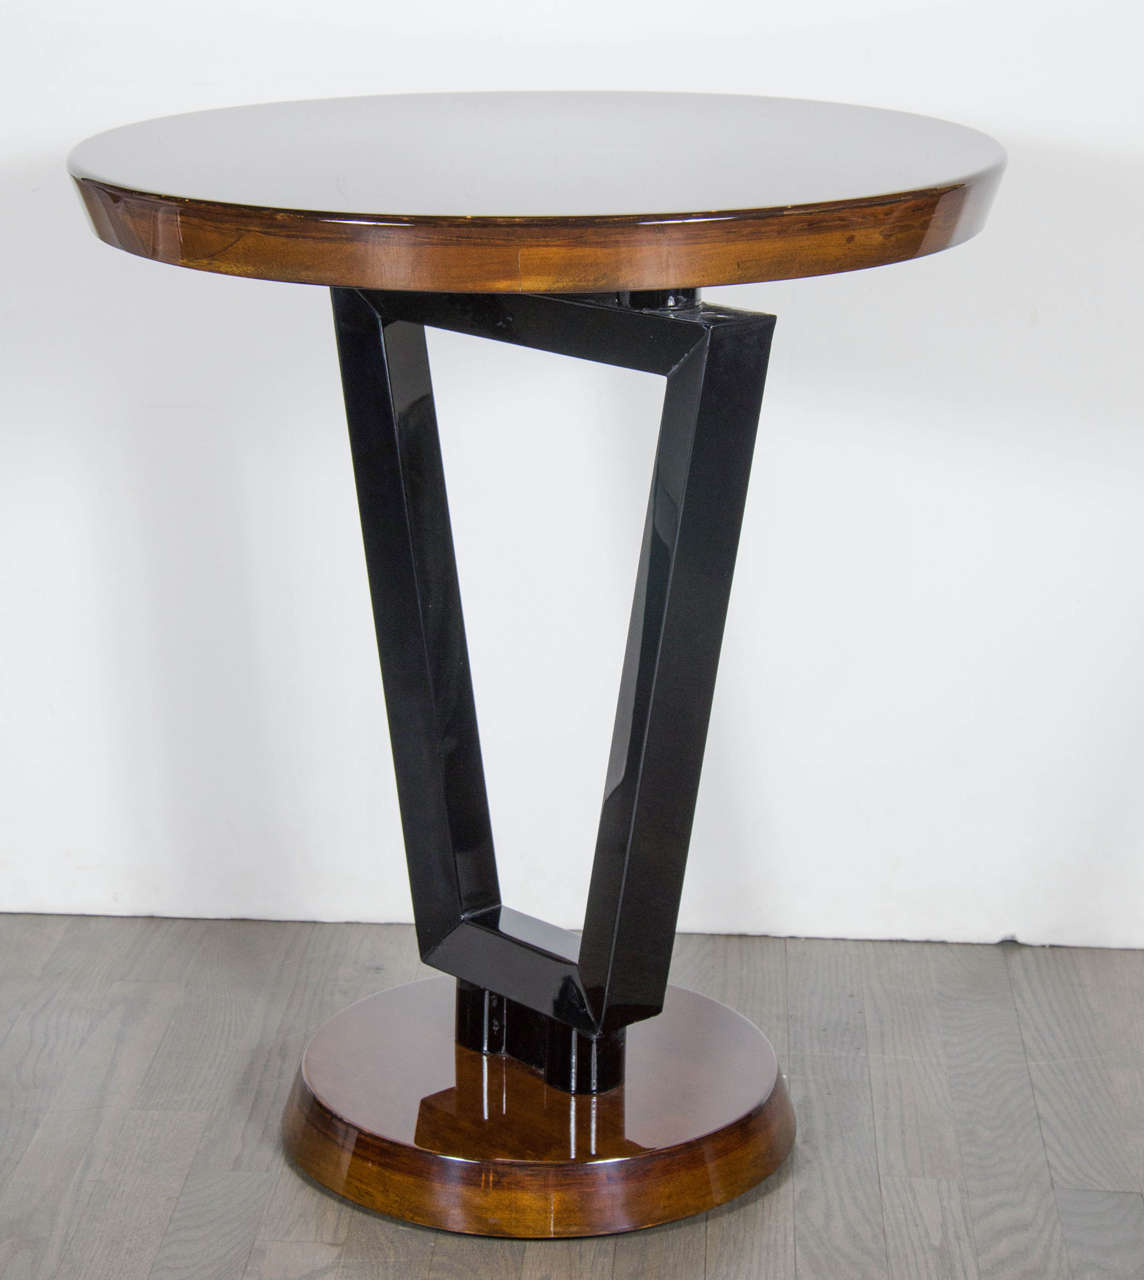 This very sophisticated Art Deco Streamlined occasional or side table features an interesting geometric angular support in black lacquer, the table top and base are book-matched walnut. Restored to mint condition.